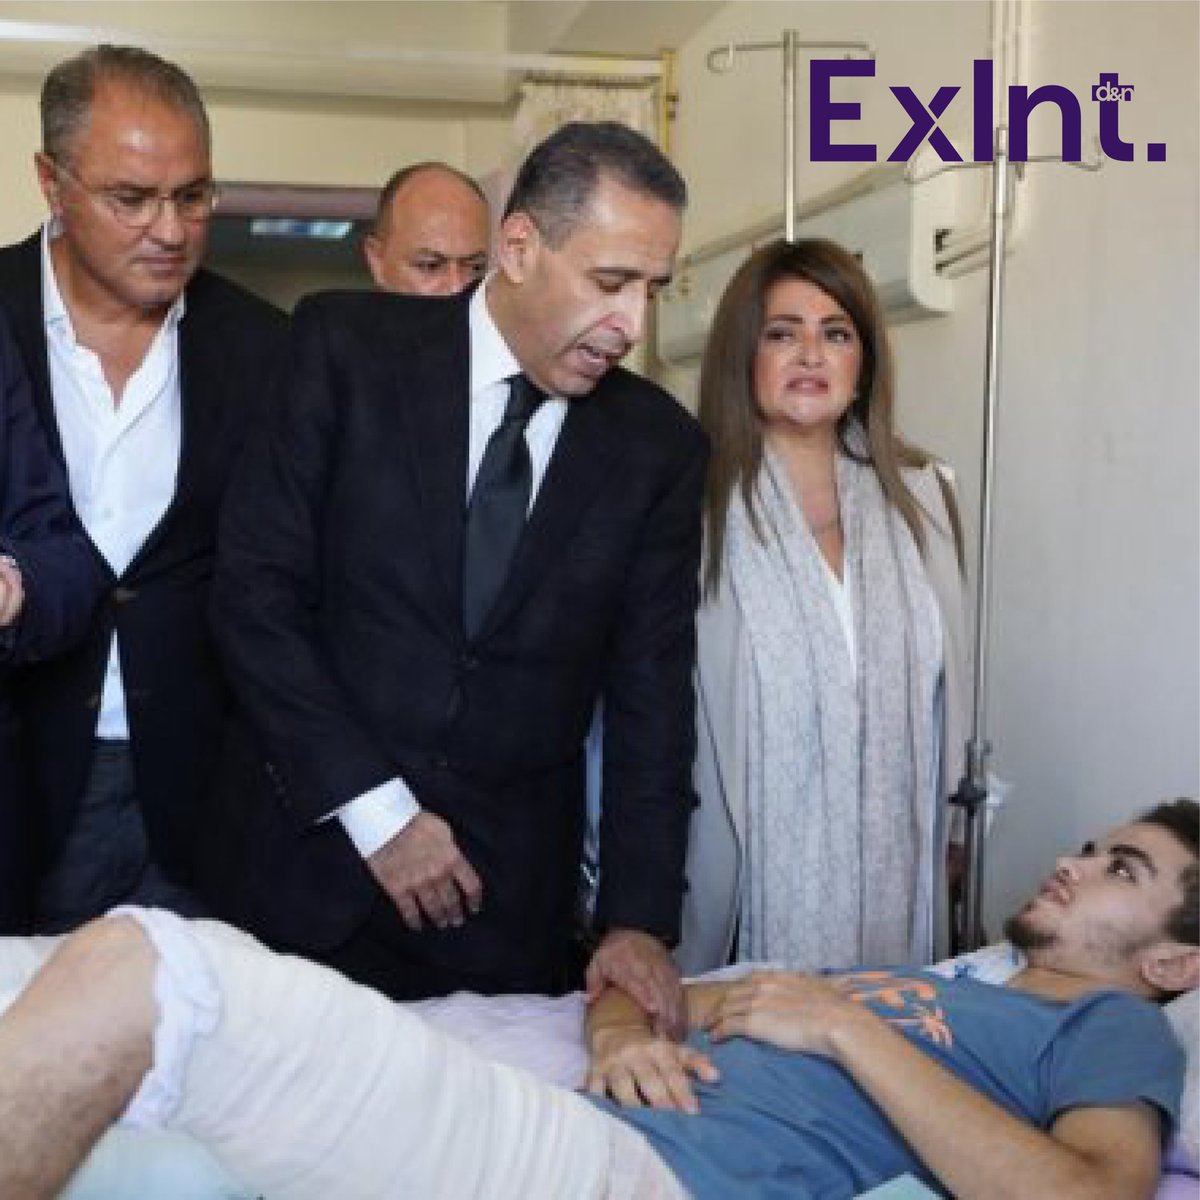 Ms. Dina Abdel Fattah, CEO of Exlnt Communications and Board member of UMS, visited the injured Palestinians under Egypt's care at Al-Arish General Hospital

#FreePalestine #Top50 #Top50WomenForum #RafahBorderCrossing